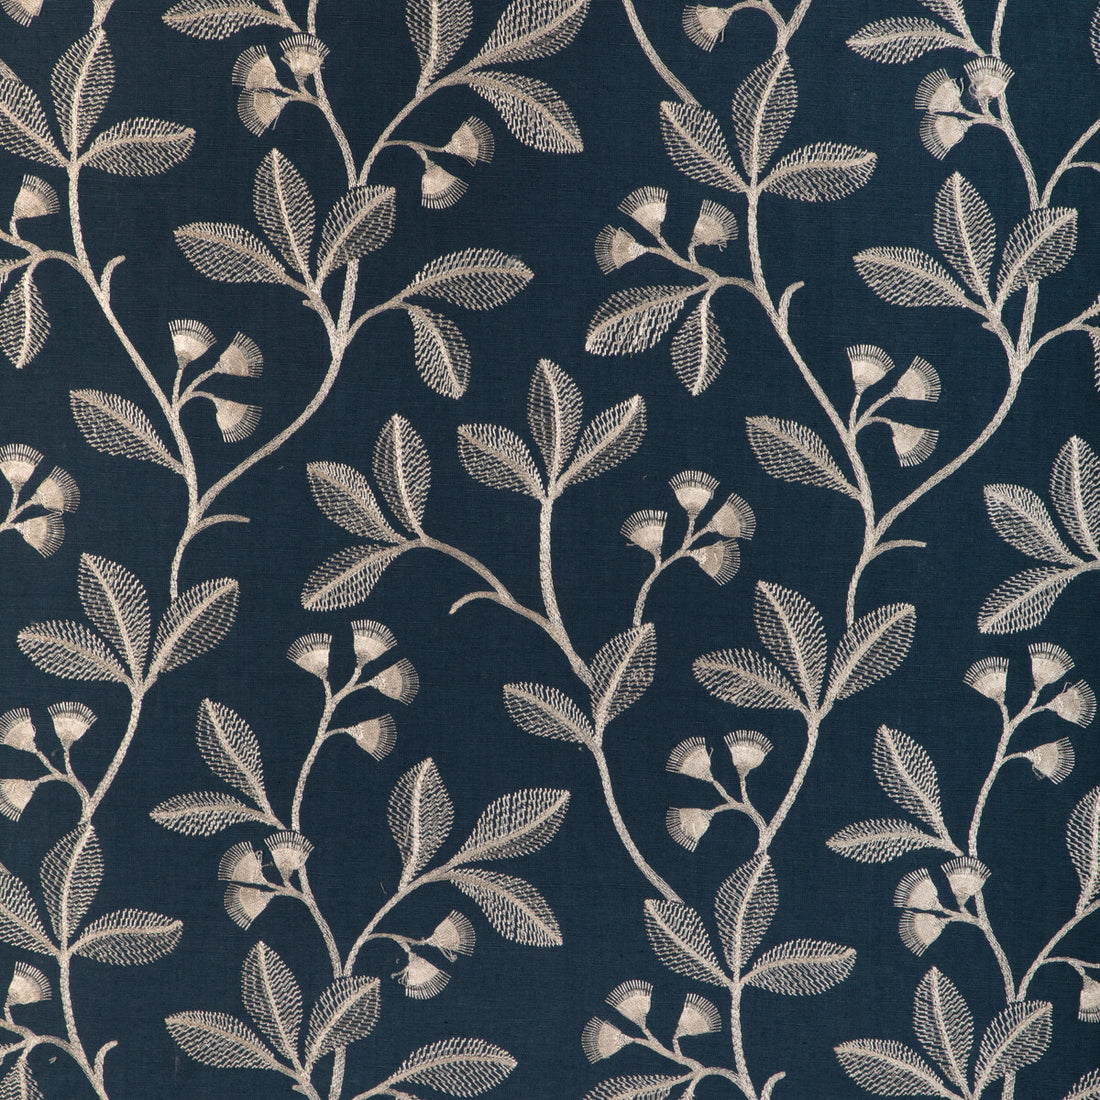 Iris Embroidery fabric in midnight color - pattern 2023144.50.0 - by Lee Jofa in the Garden Walk collection